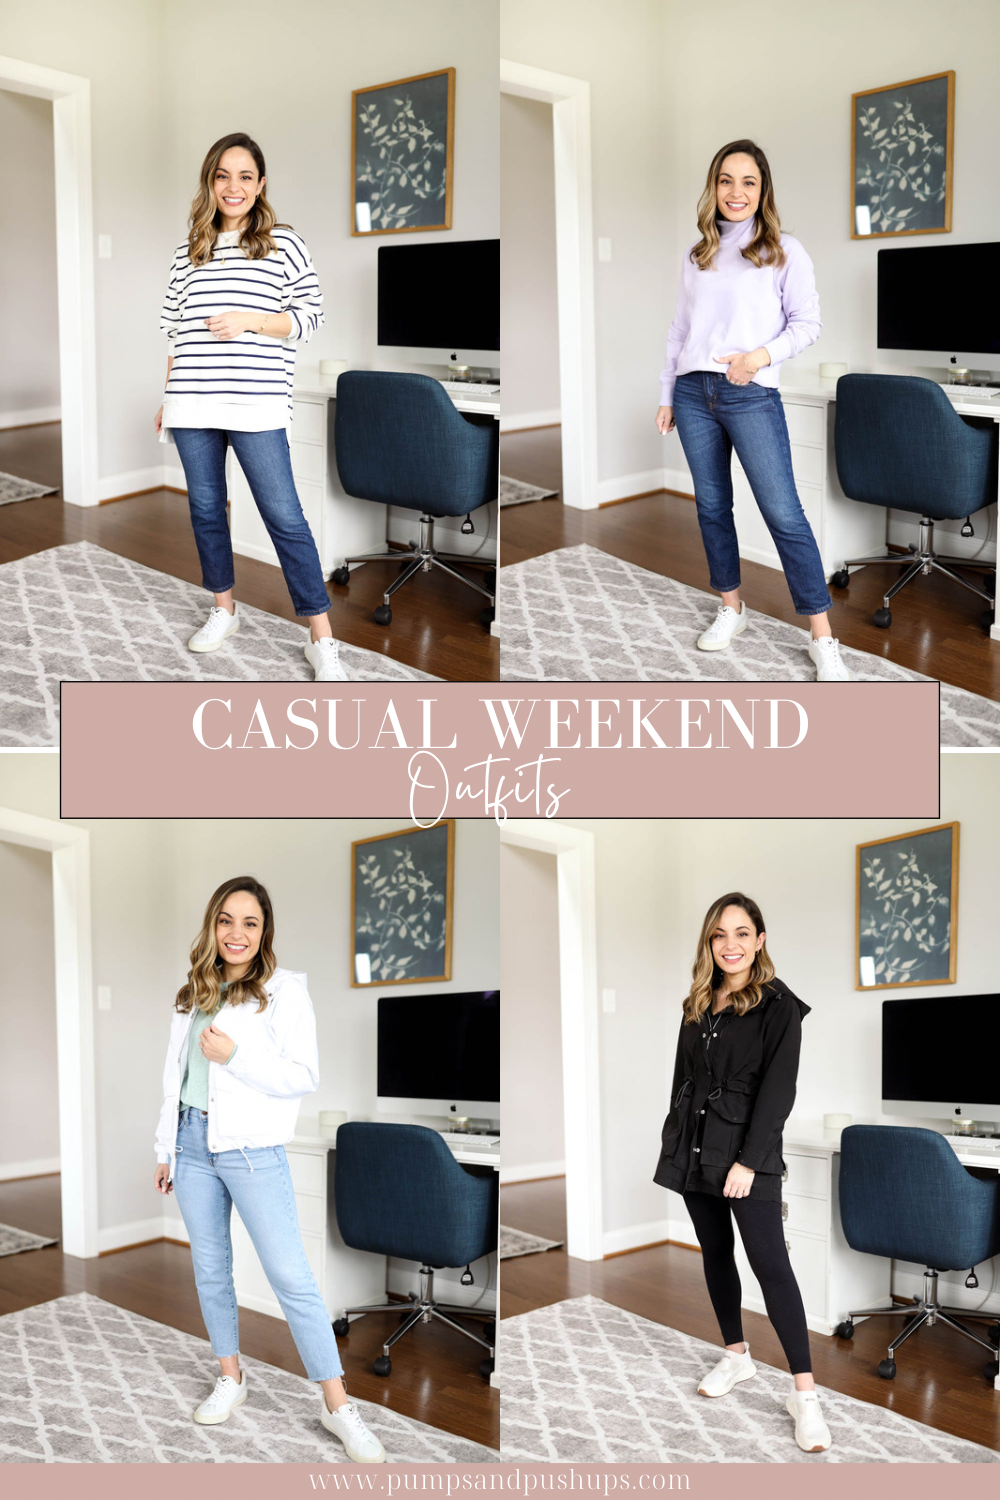 50 Beautiful Weekend Casual Outfits For Women #CasualOutfit #ReadyToMeal  #WeekendCasualOutfits